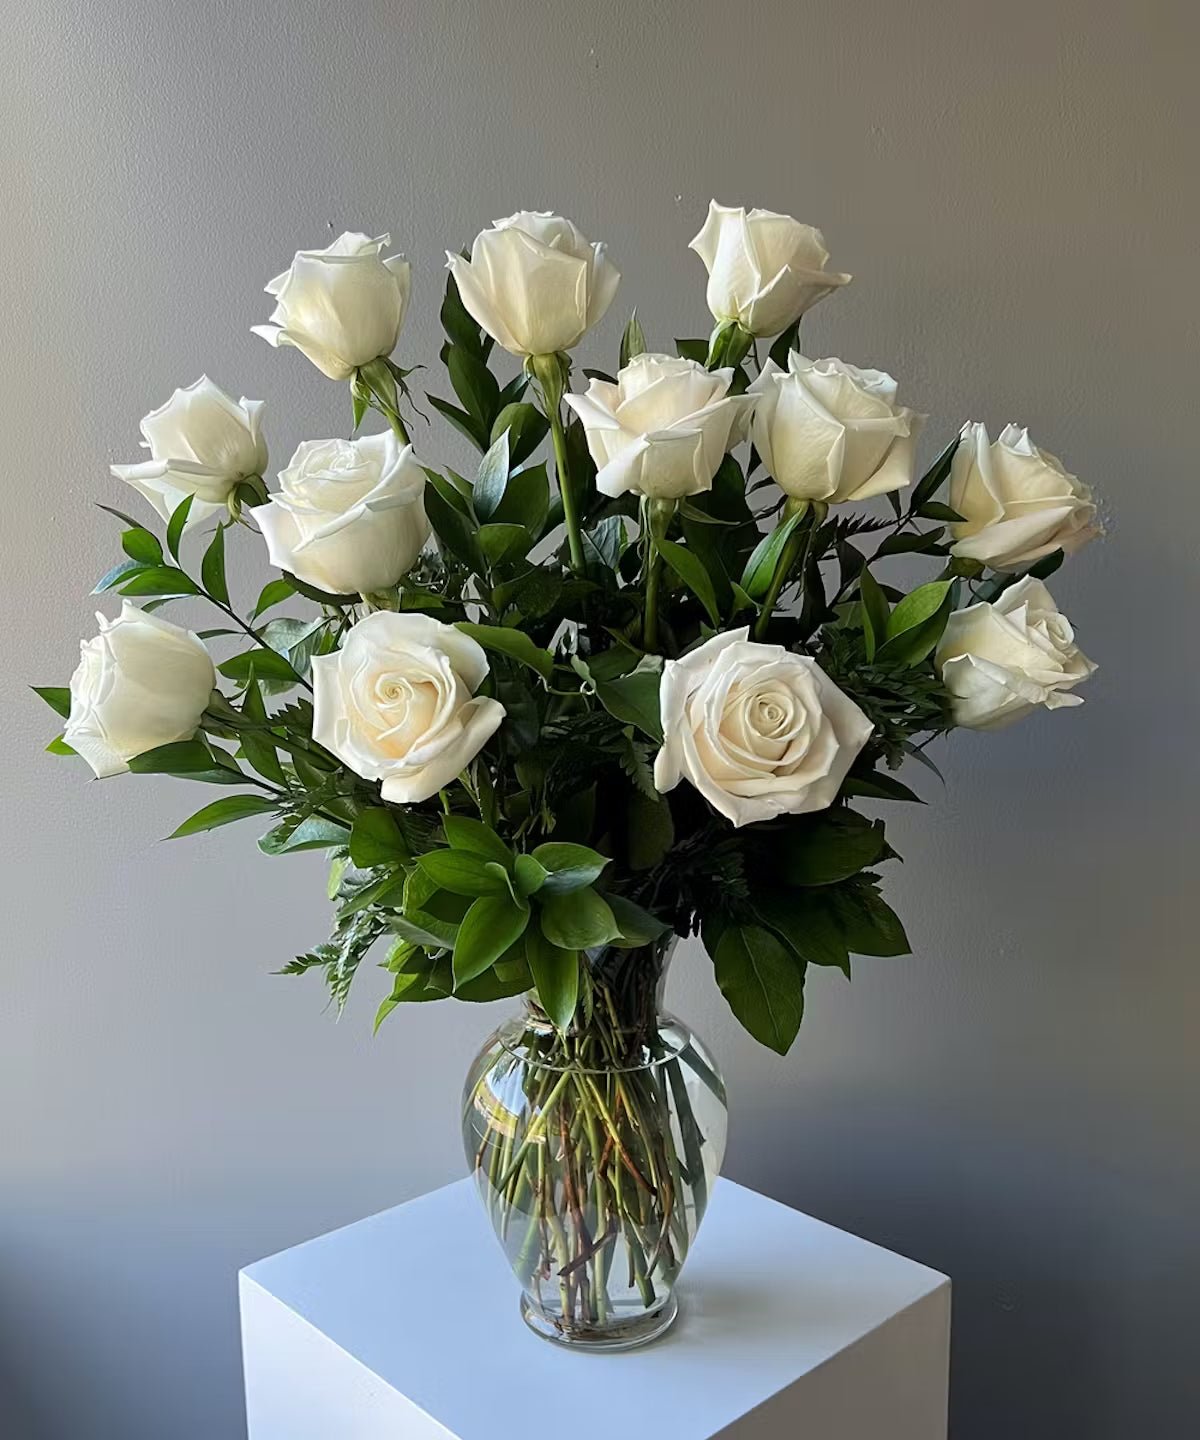 White Roses in a Vase - Lily's Bloom Boutique